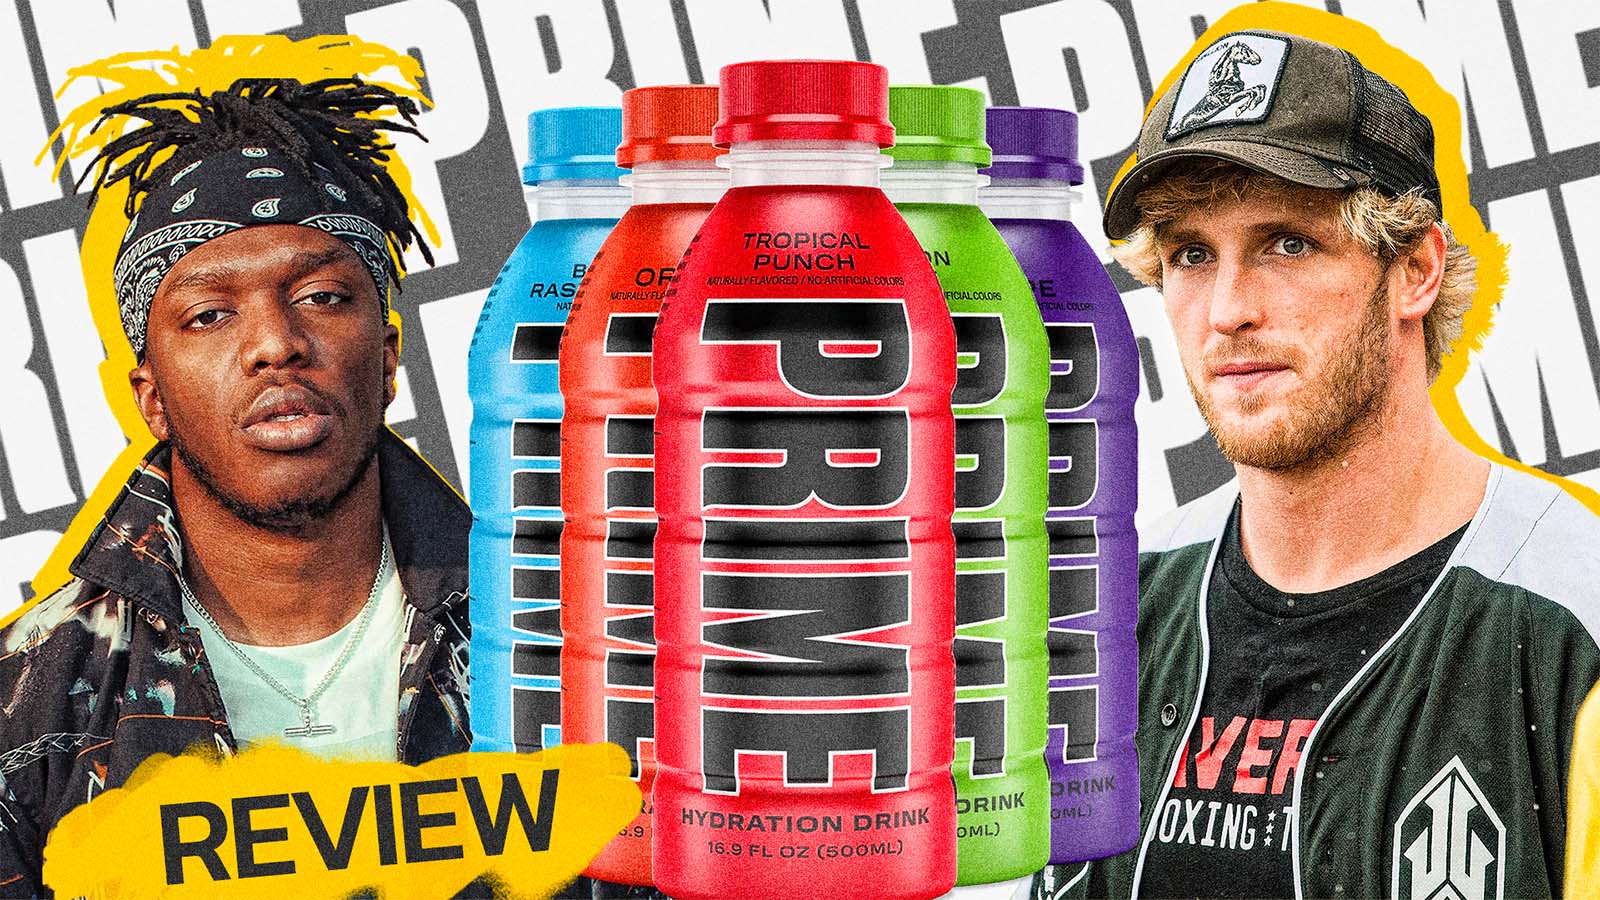 Logan Paul responds to PRIME energy drink critics with a fact